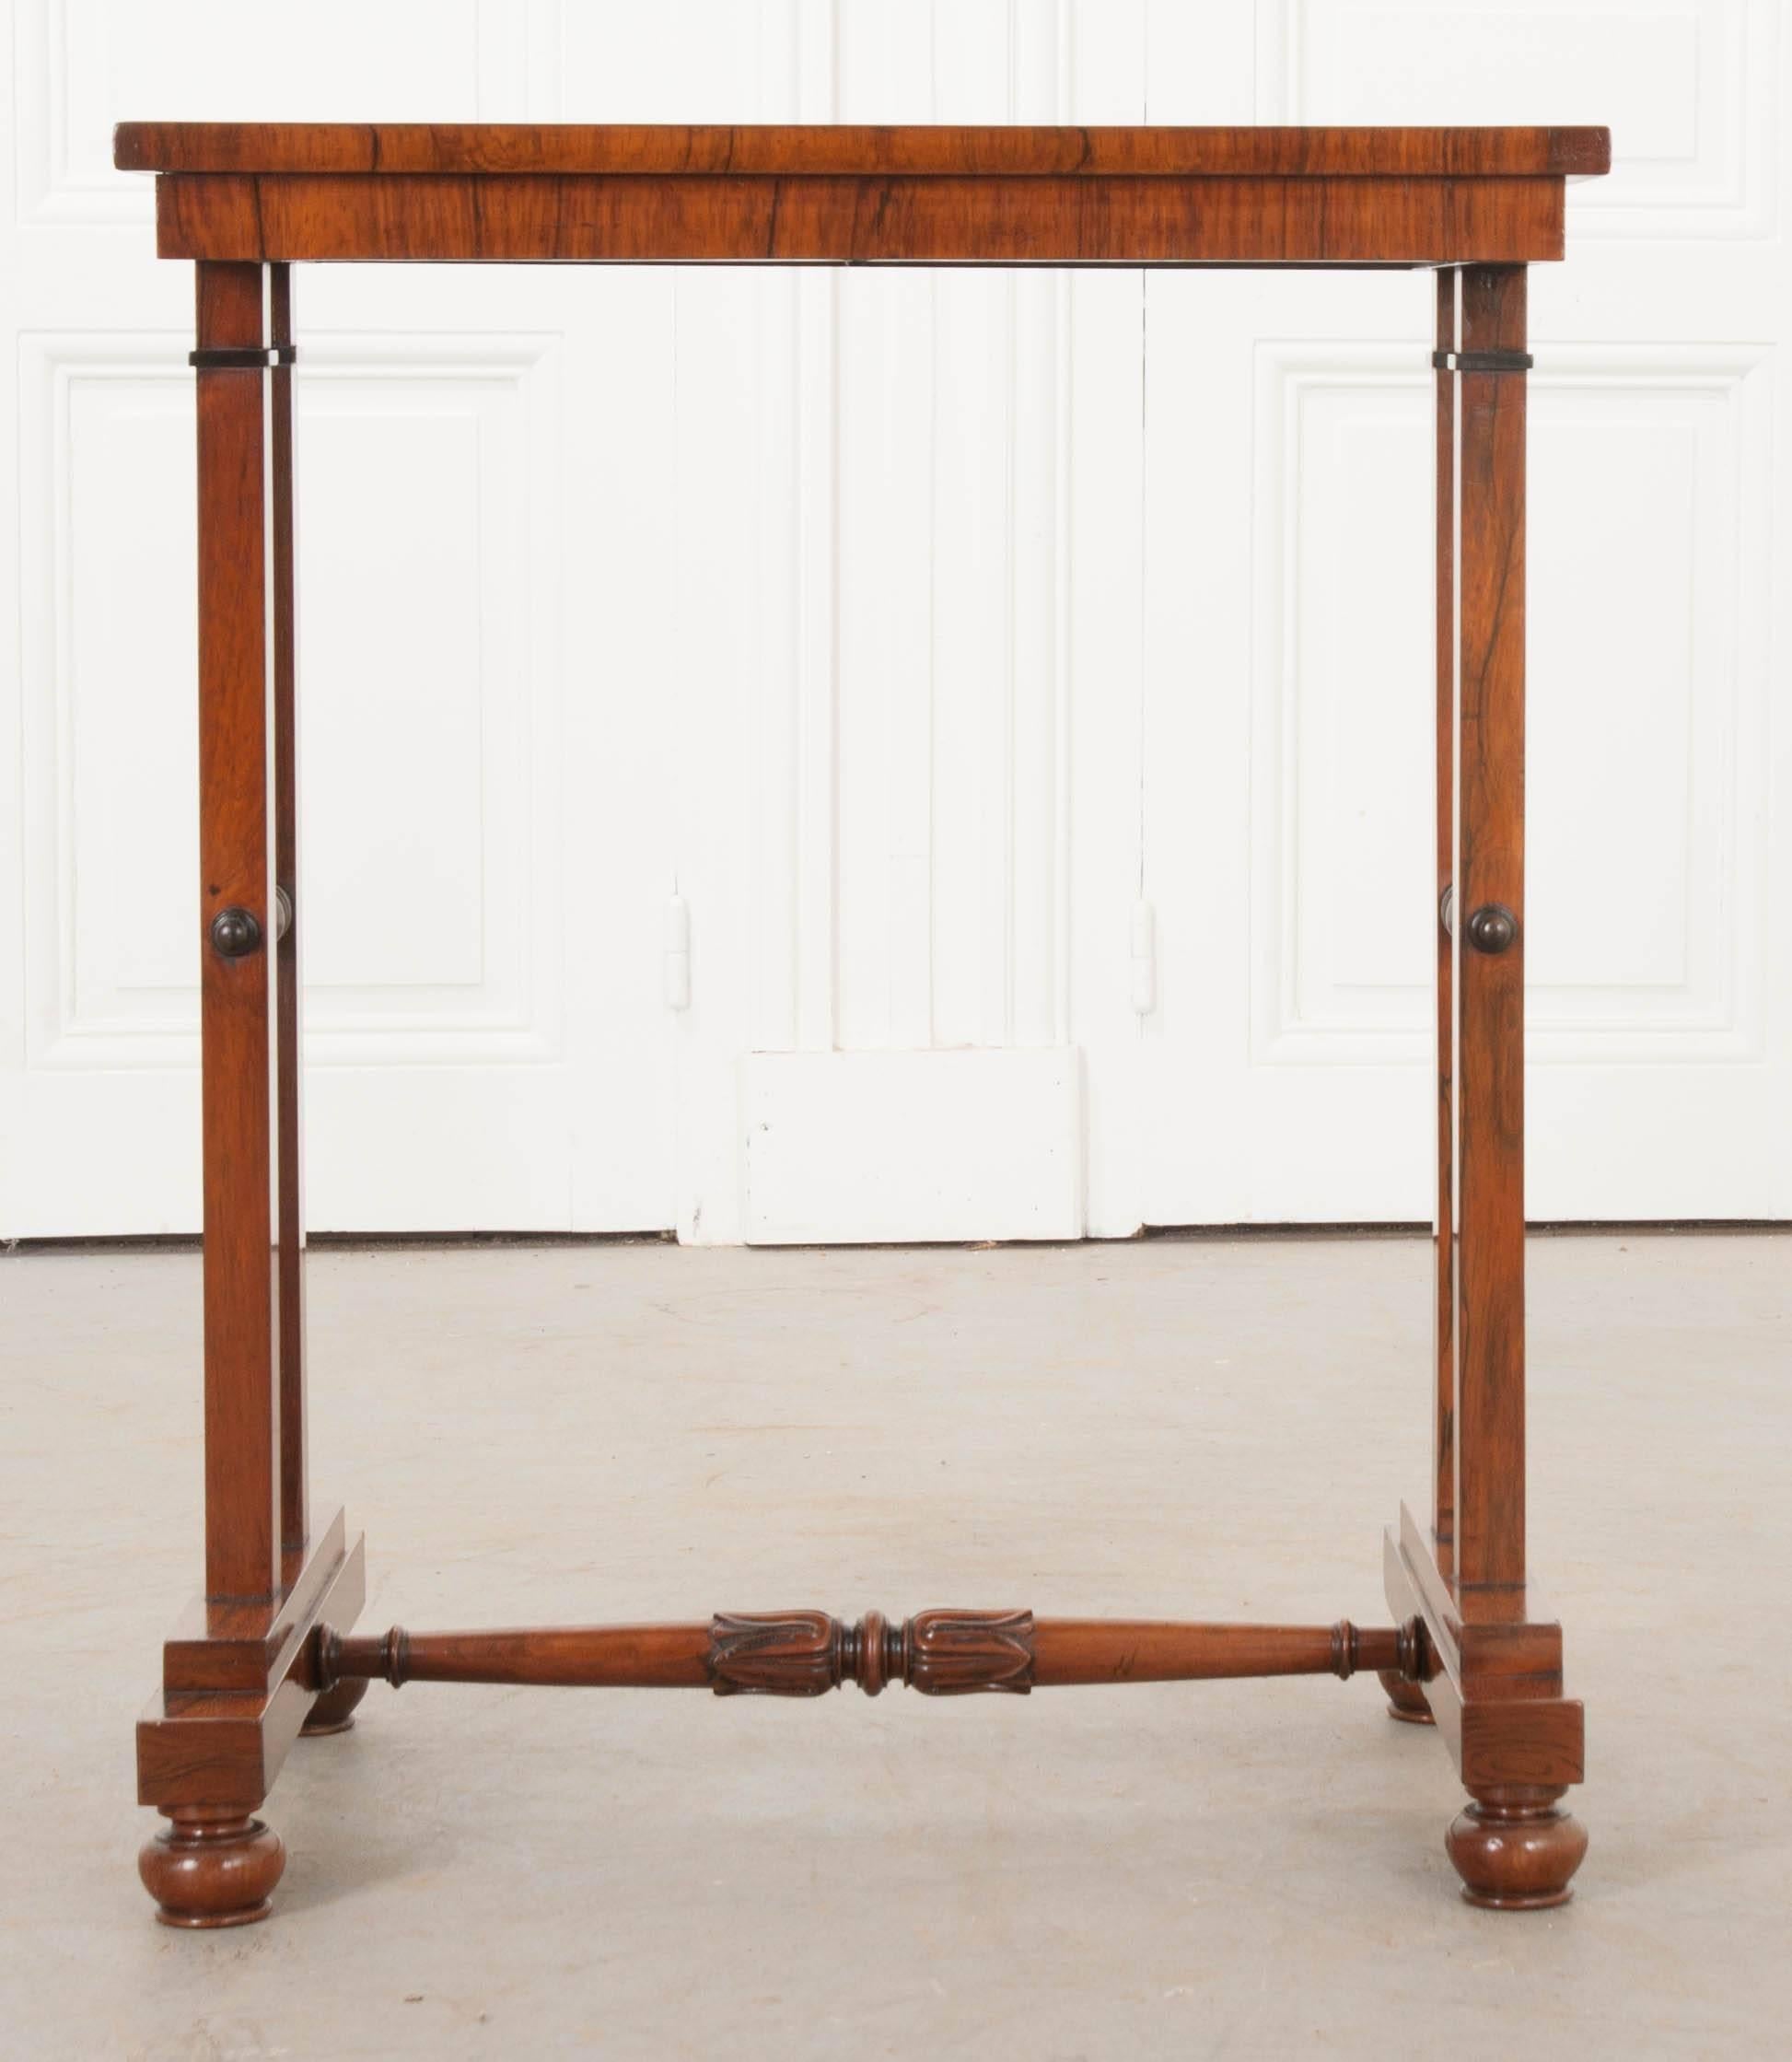 A sweet little George IV library table, done in rosewood, from early 19th century England. This fantastic table features a book-matched rosewood veneer top that is in excellent antique condition. The top is lifted by four linear legs. The legs are